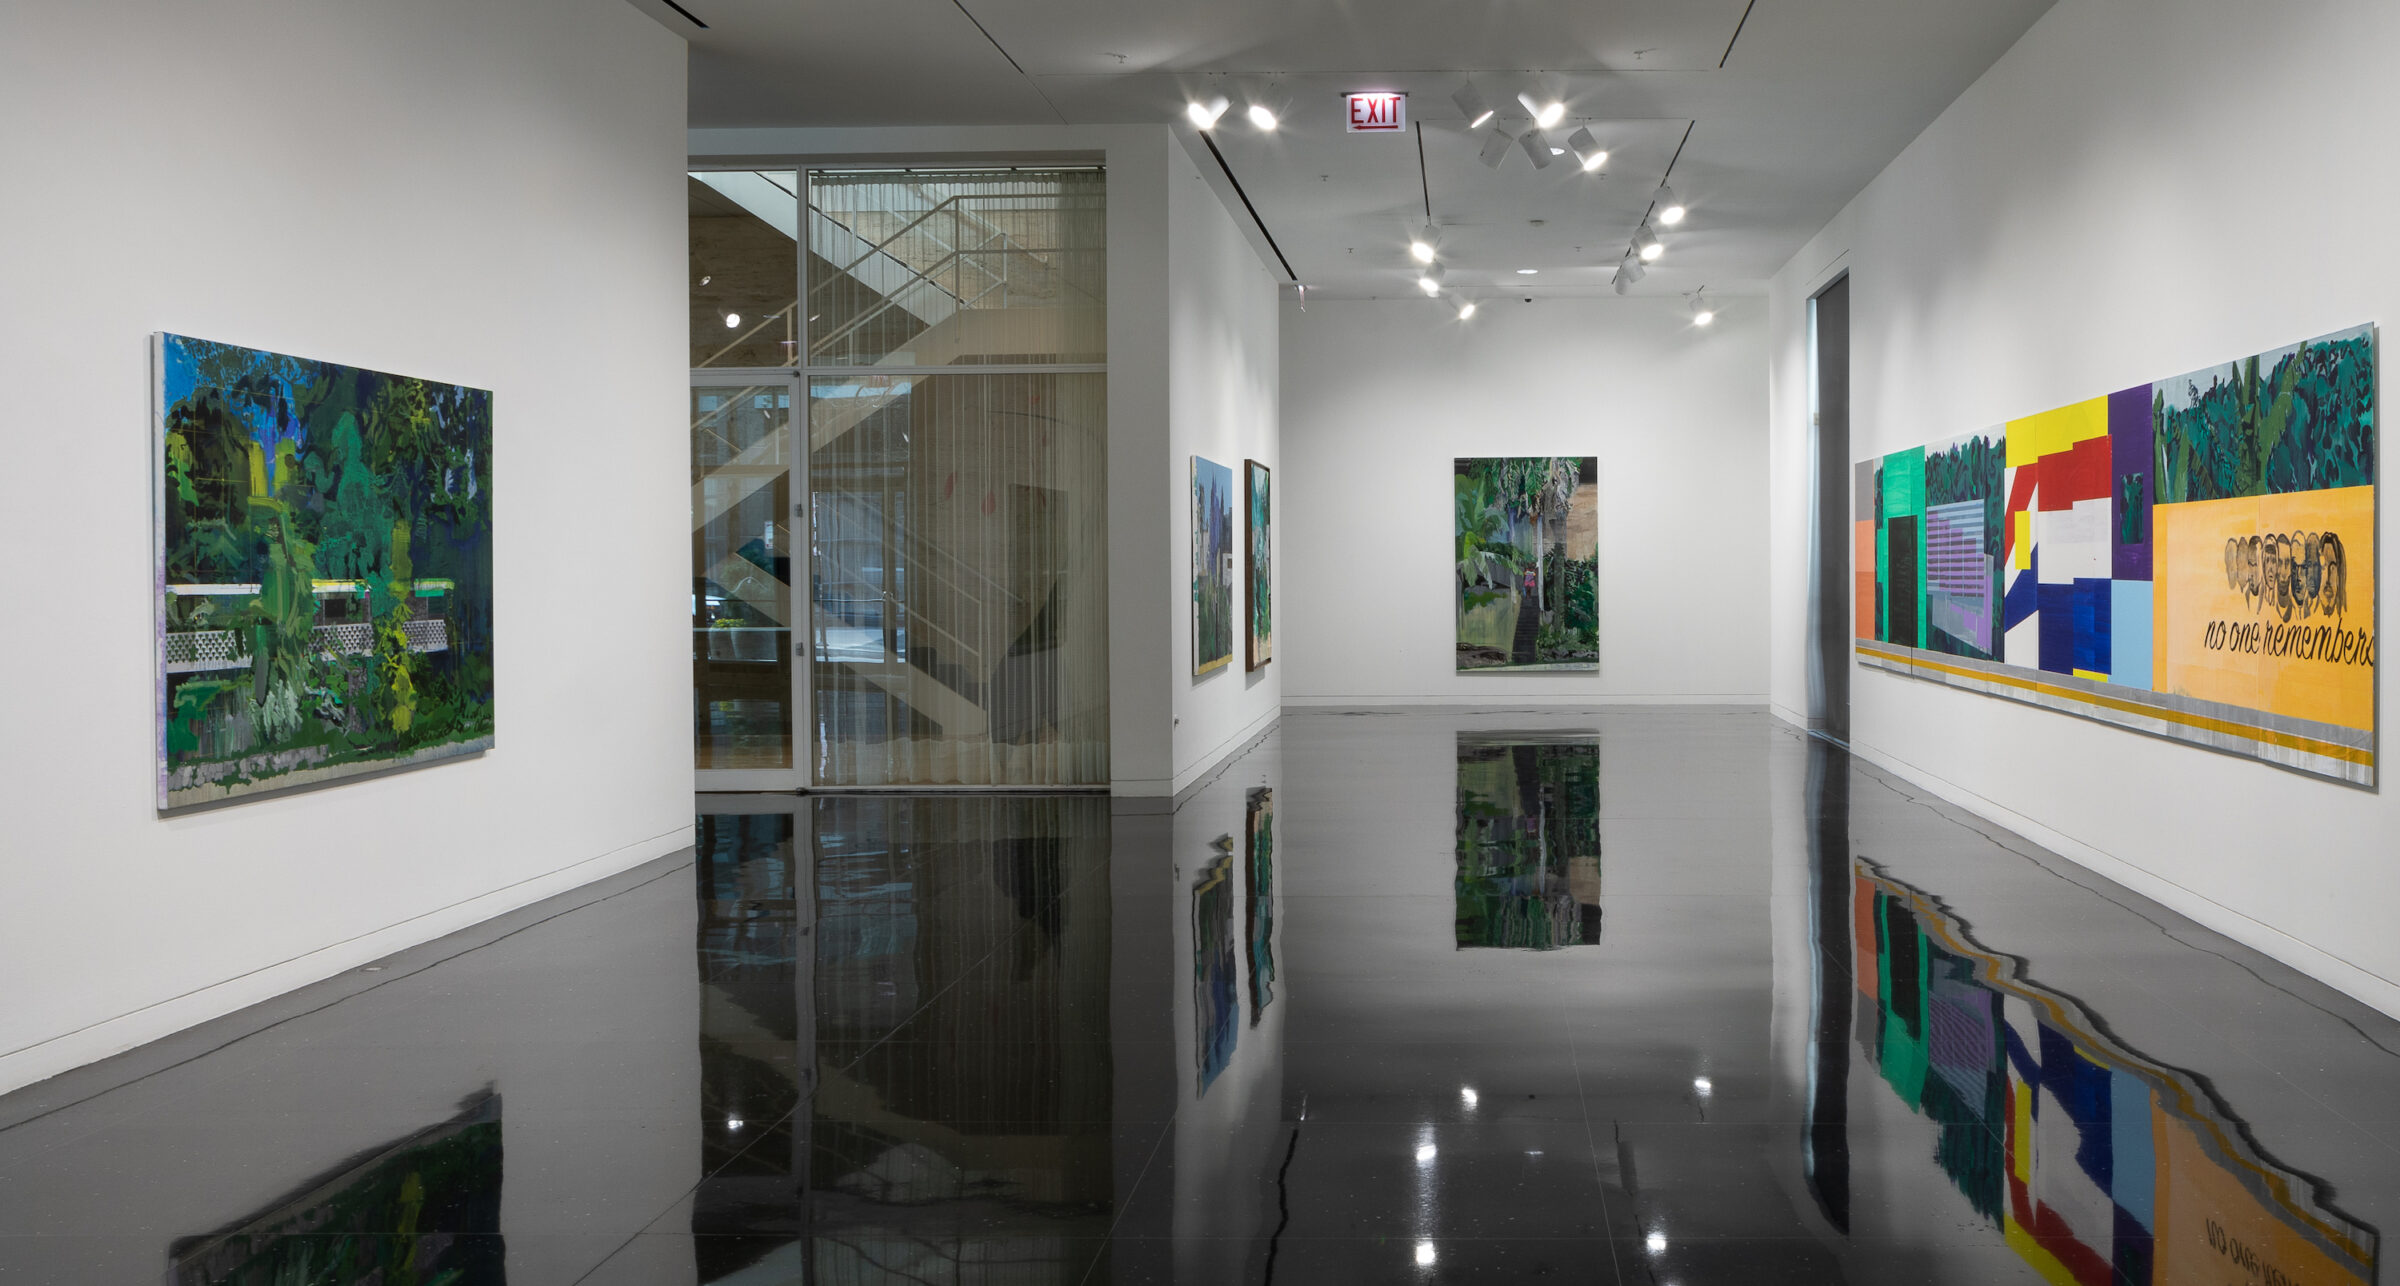 A white gallery space in which five mostly green landscape paintings hang. On the far right wall is a large banner-like painting spanning the length of the wall, the far end of which reads "no one remembers" in black cursive script.